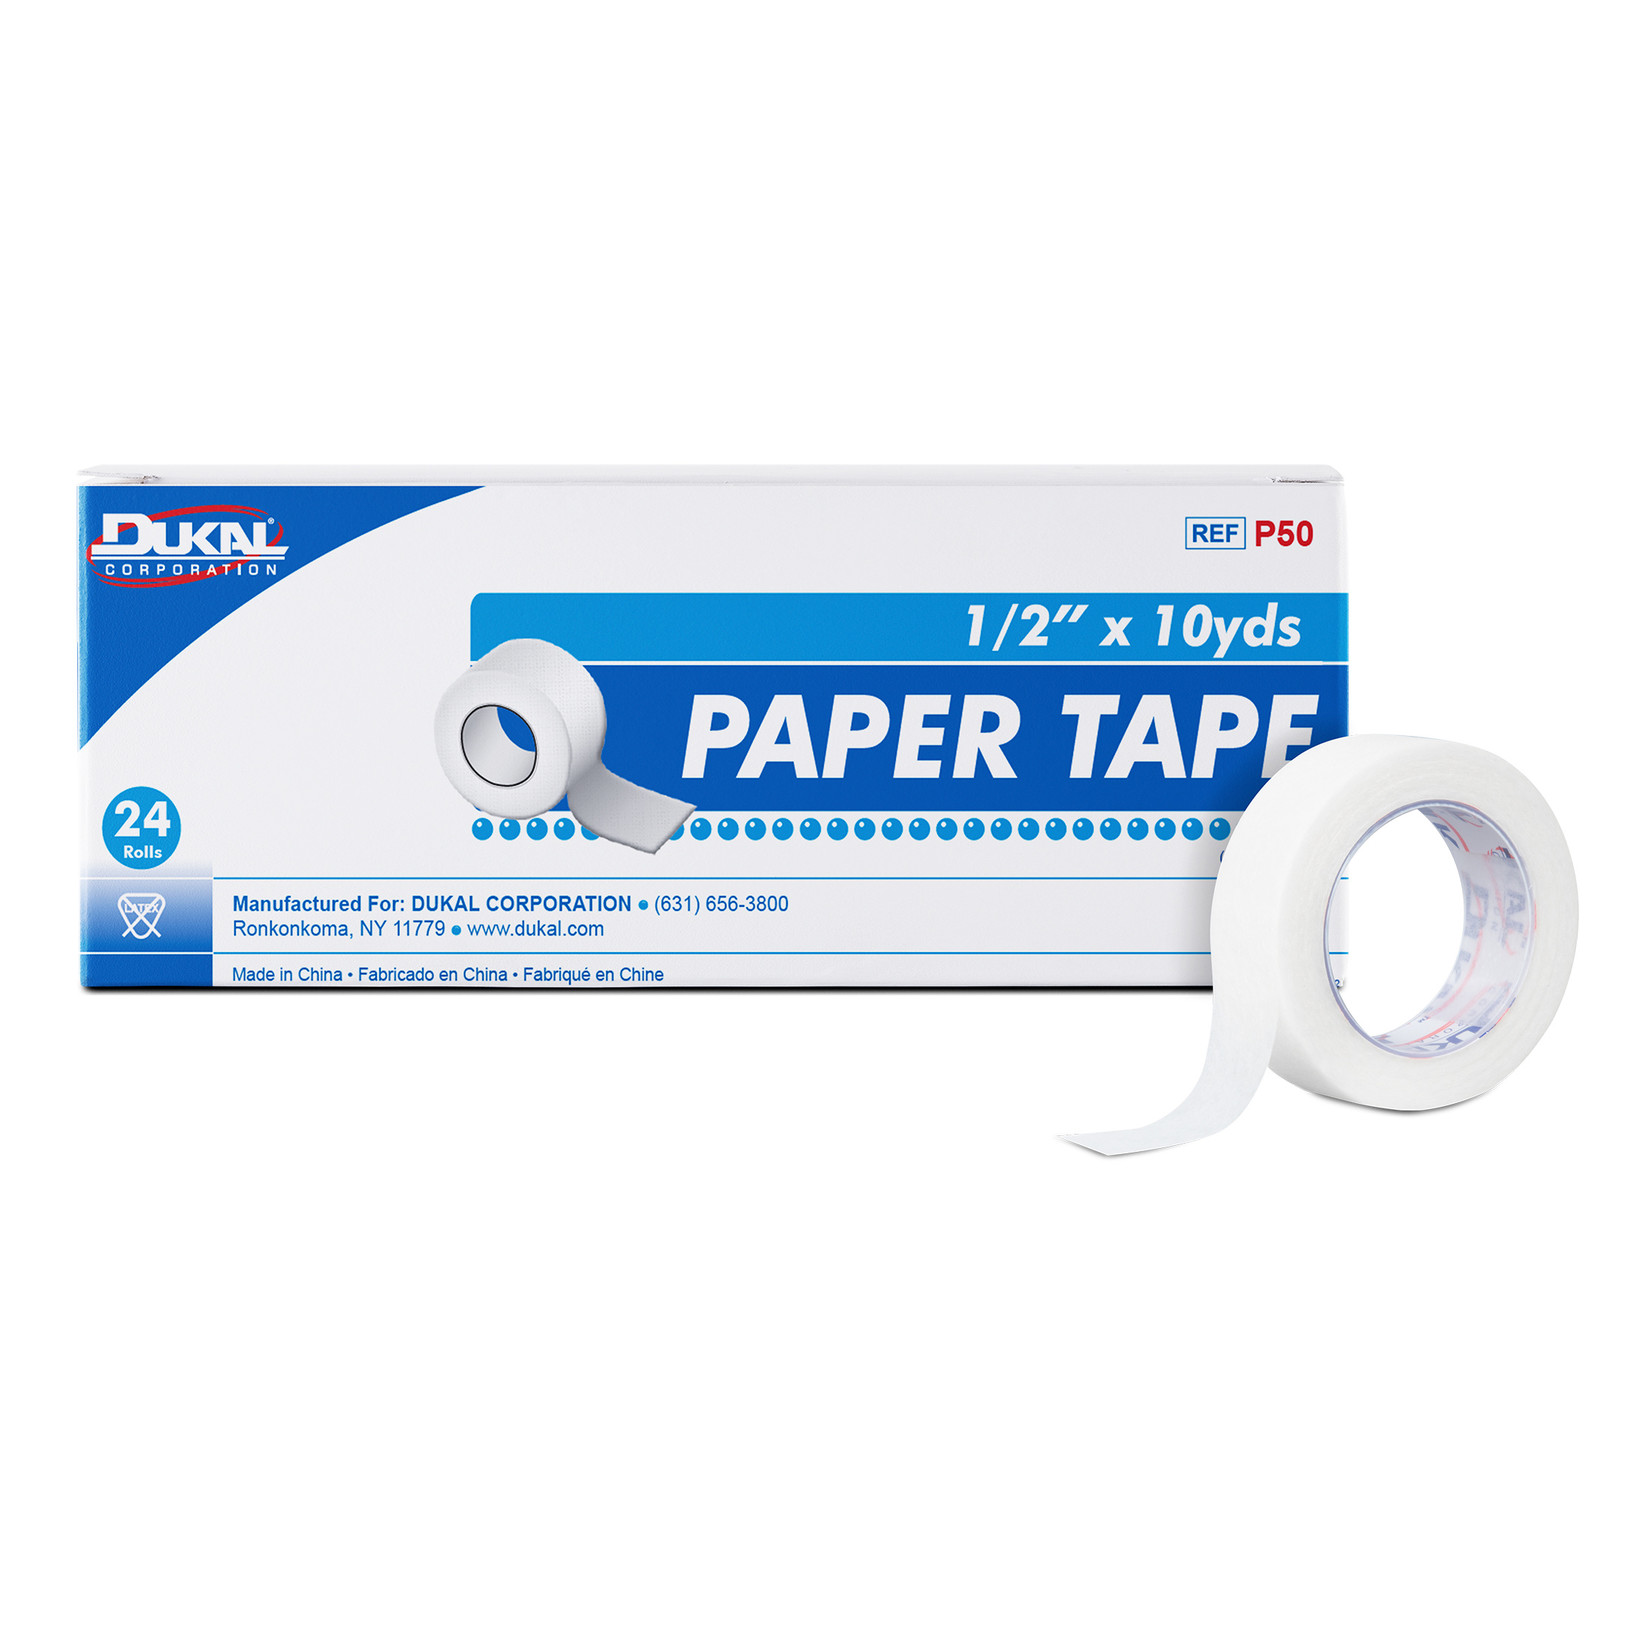 DUKAL SURGICAL PAPER TAPE - LATEX FREE (24)